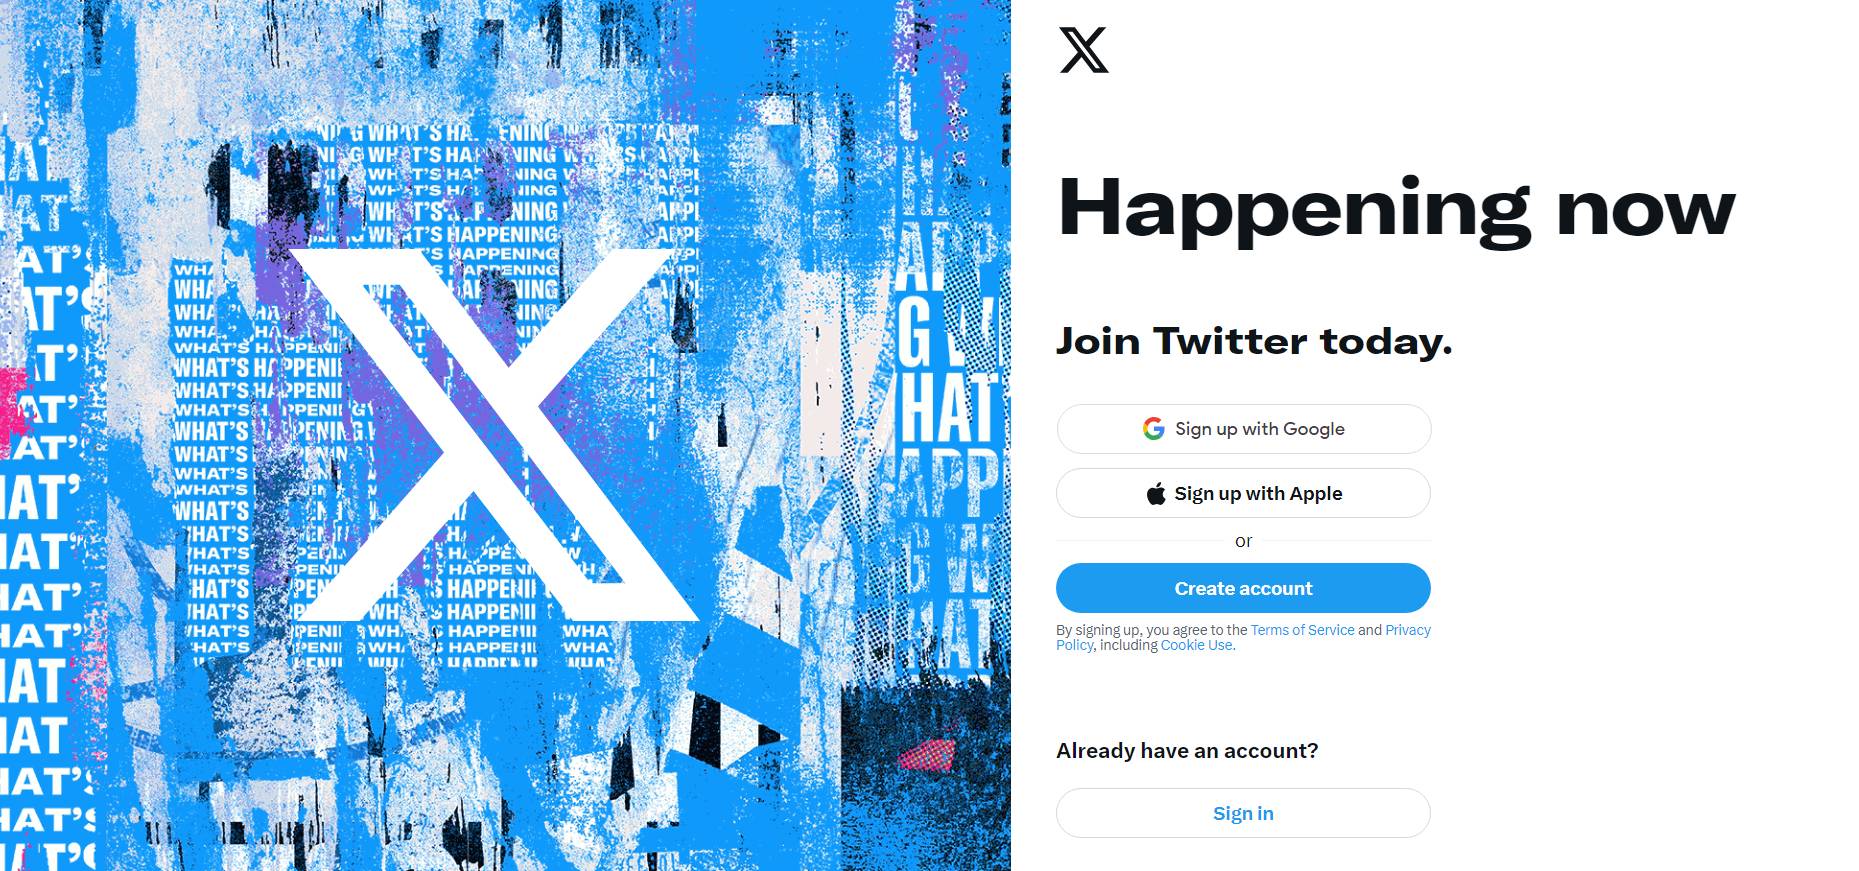 What does Twitter’s re-brand to X mean for online shoppers?